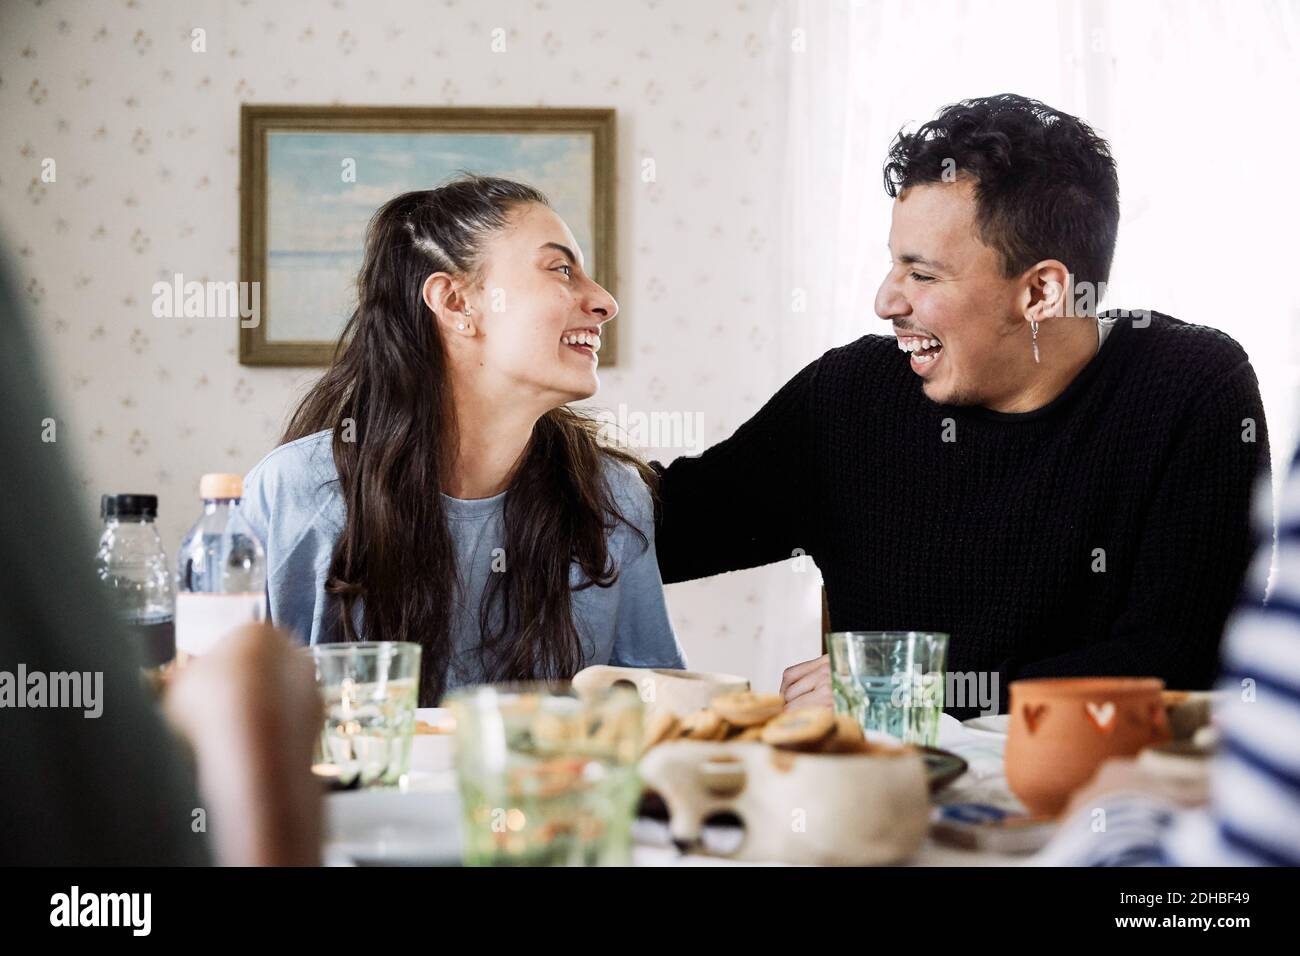 Cheerful friends looking at each other while sitting by food and drink in house Stock Photo